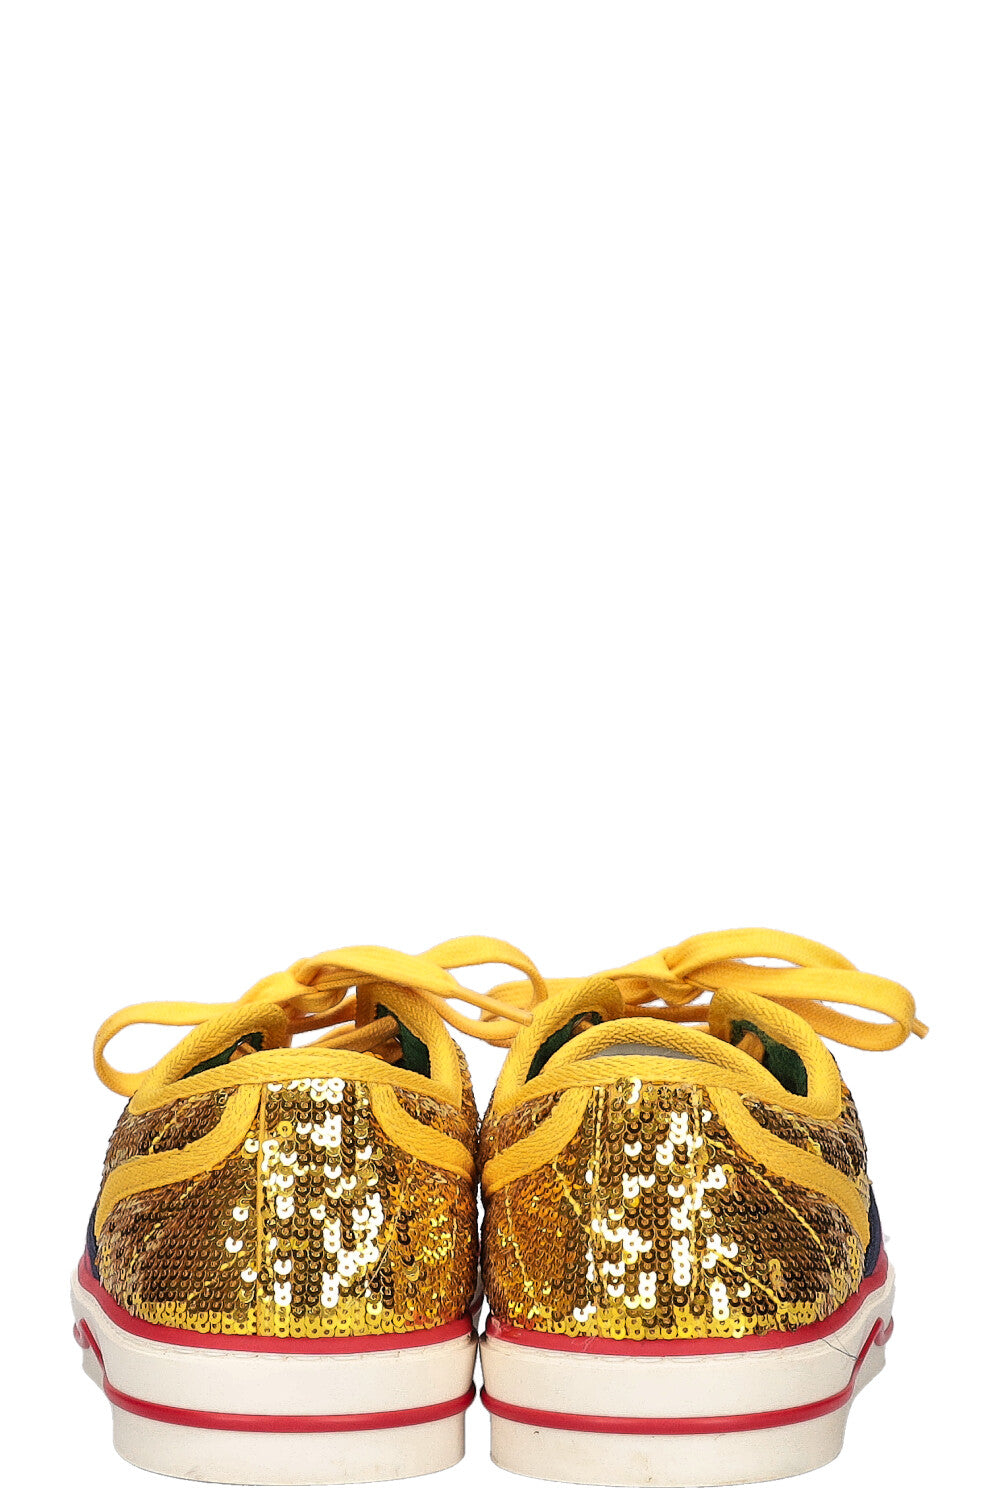 GUCCI Tennis 1977 Sequin Gold Sneakers